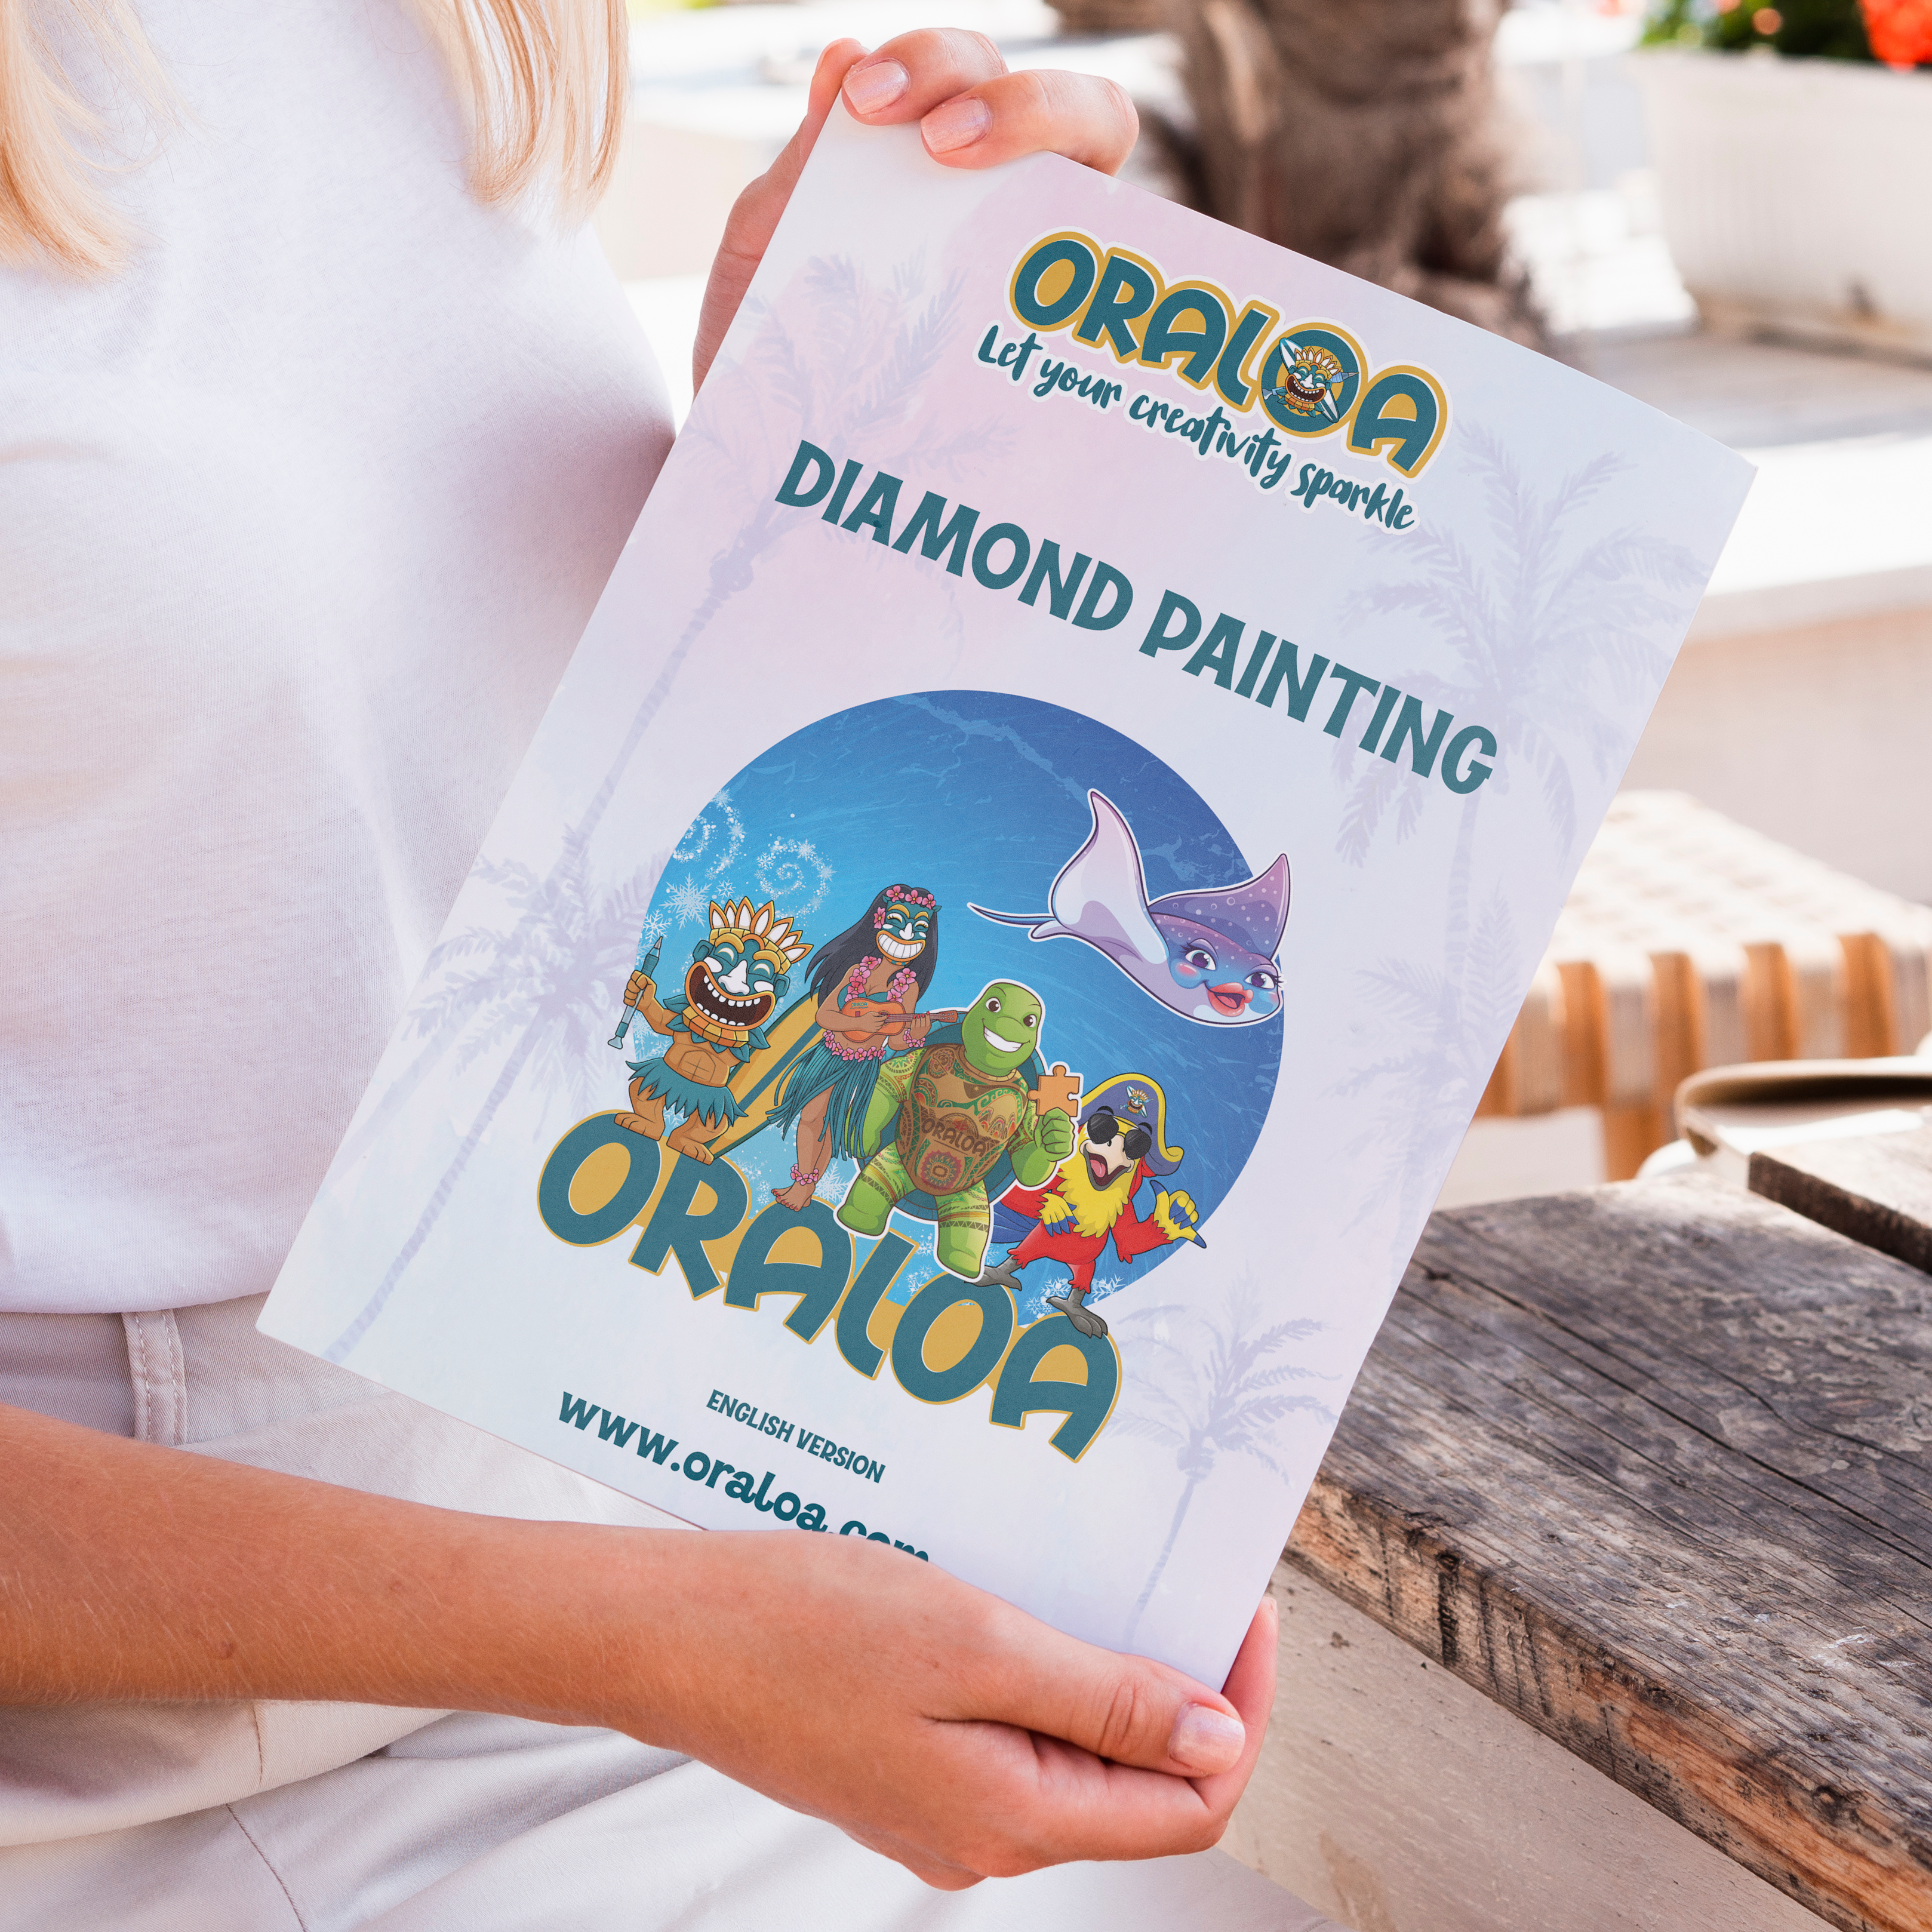 Diamond Painting activity booklet in English